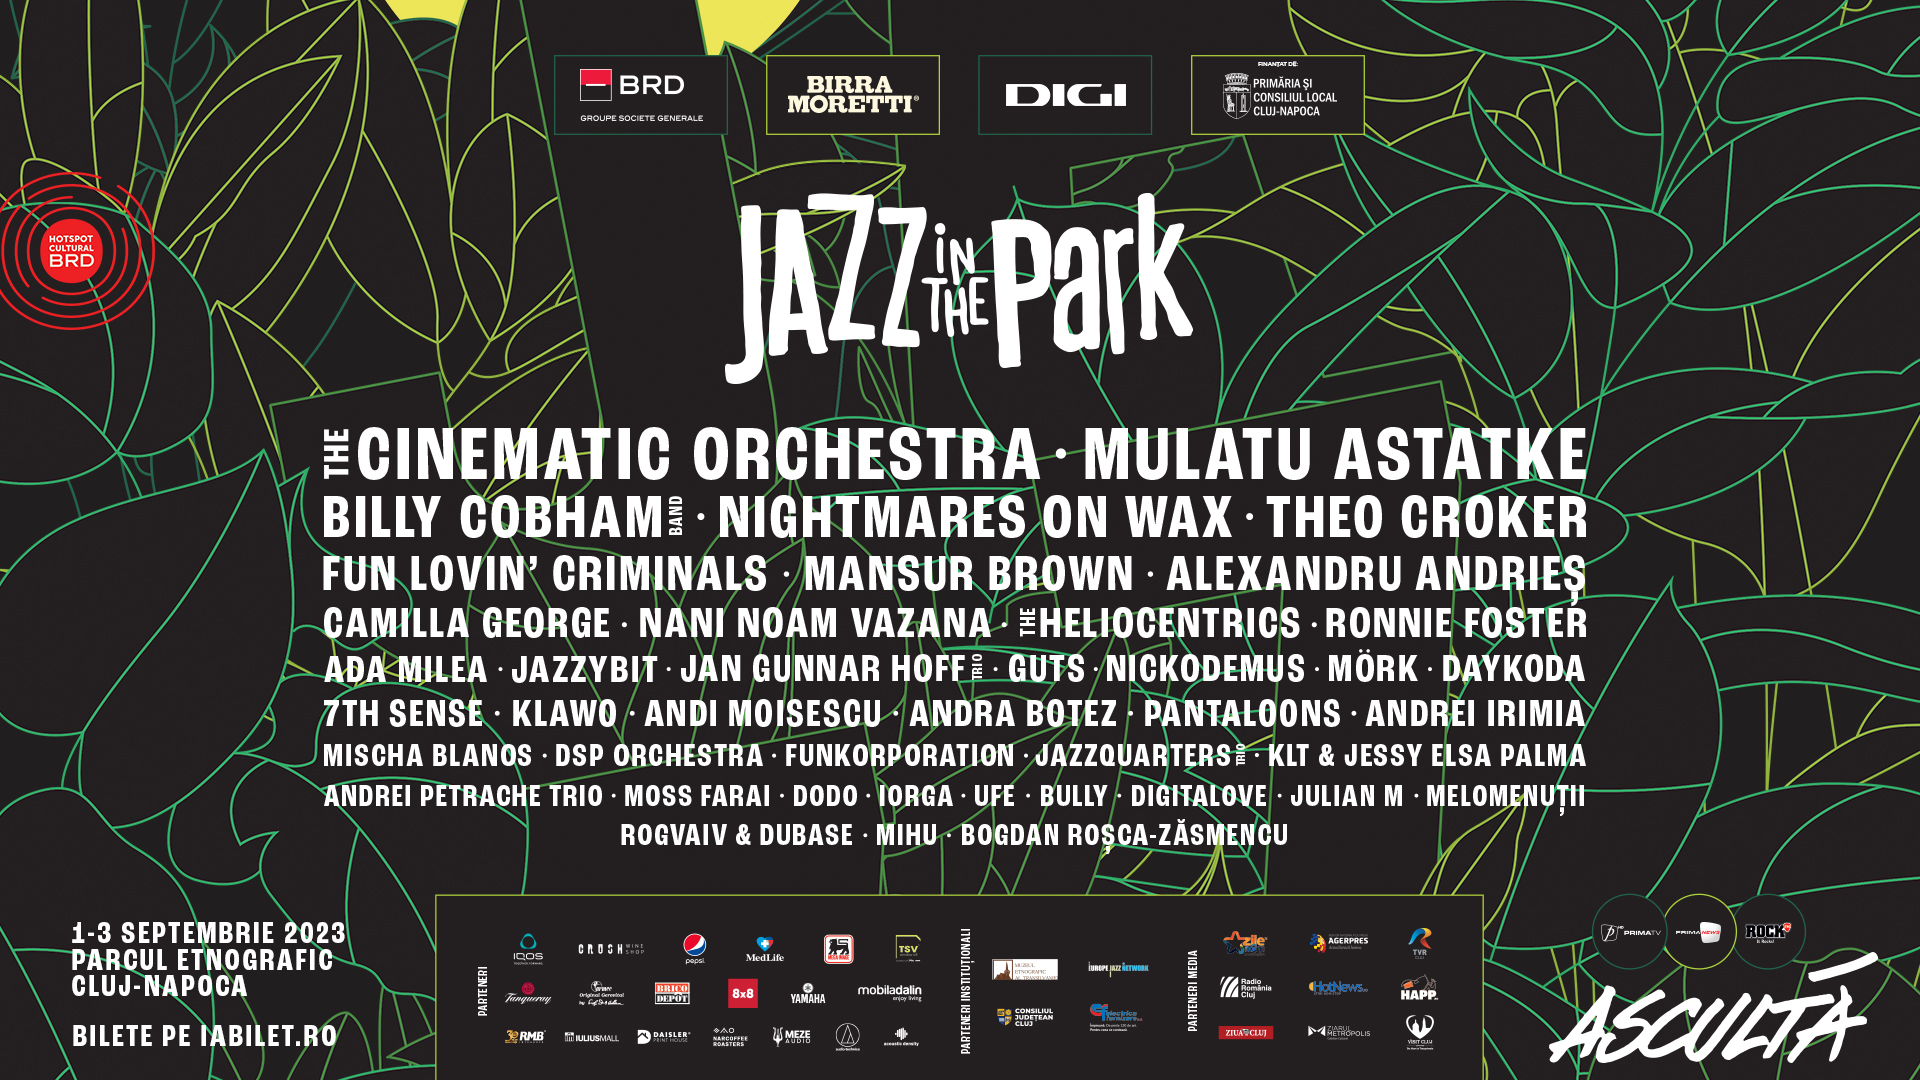 A fost anunțat lineup-ul complet la Jazz in the Park 2023